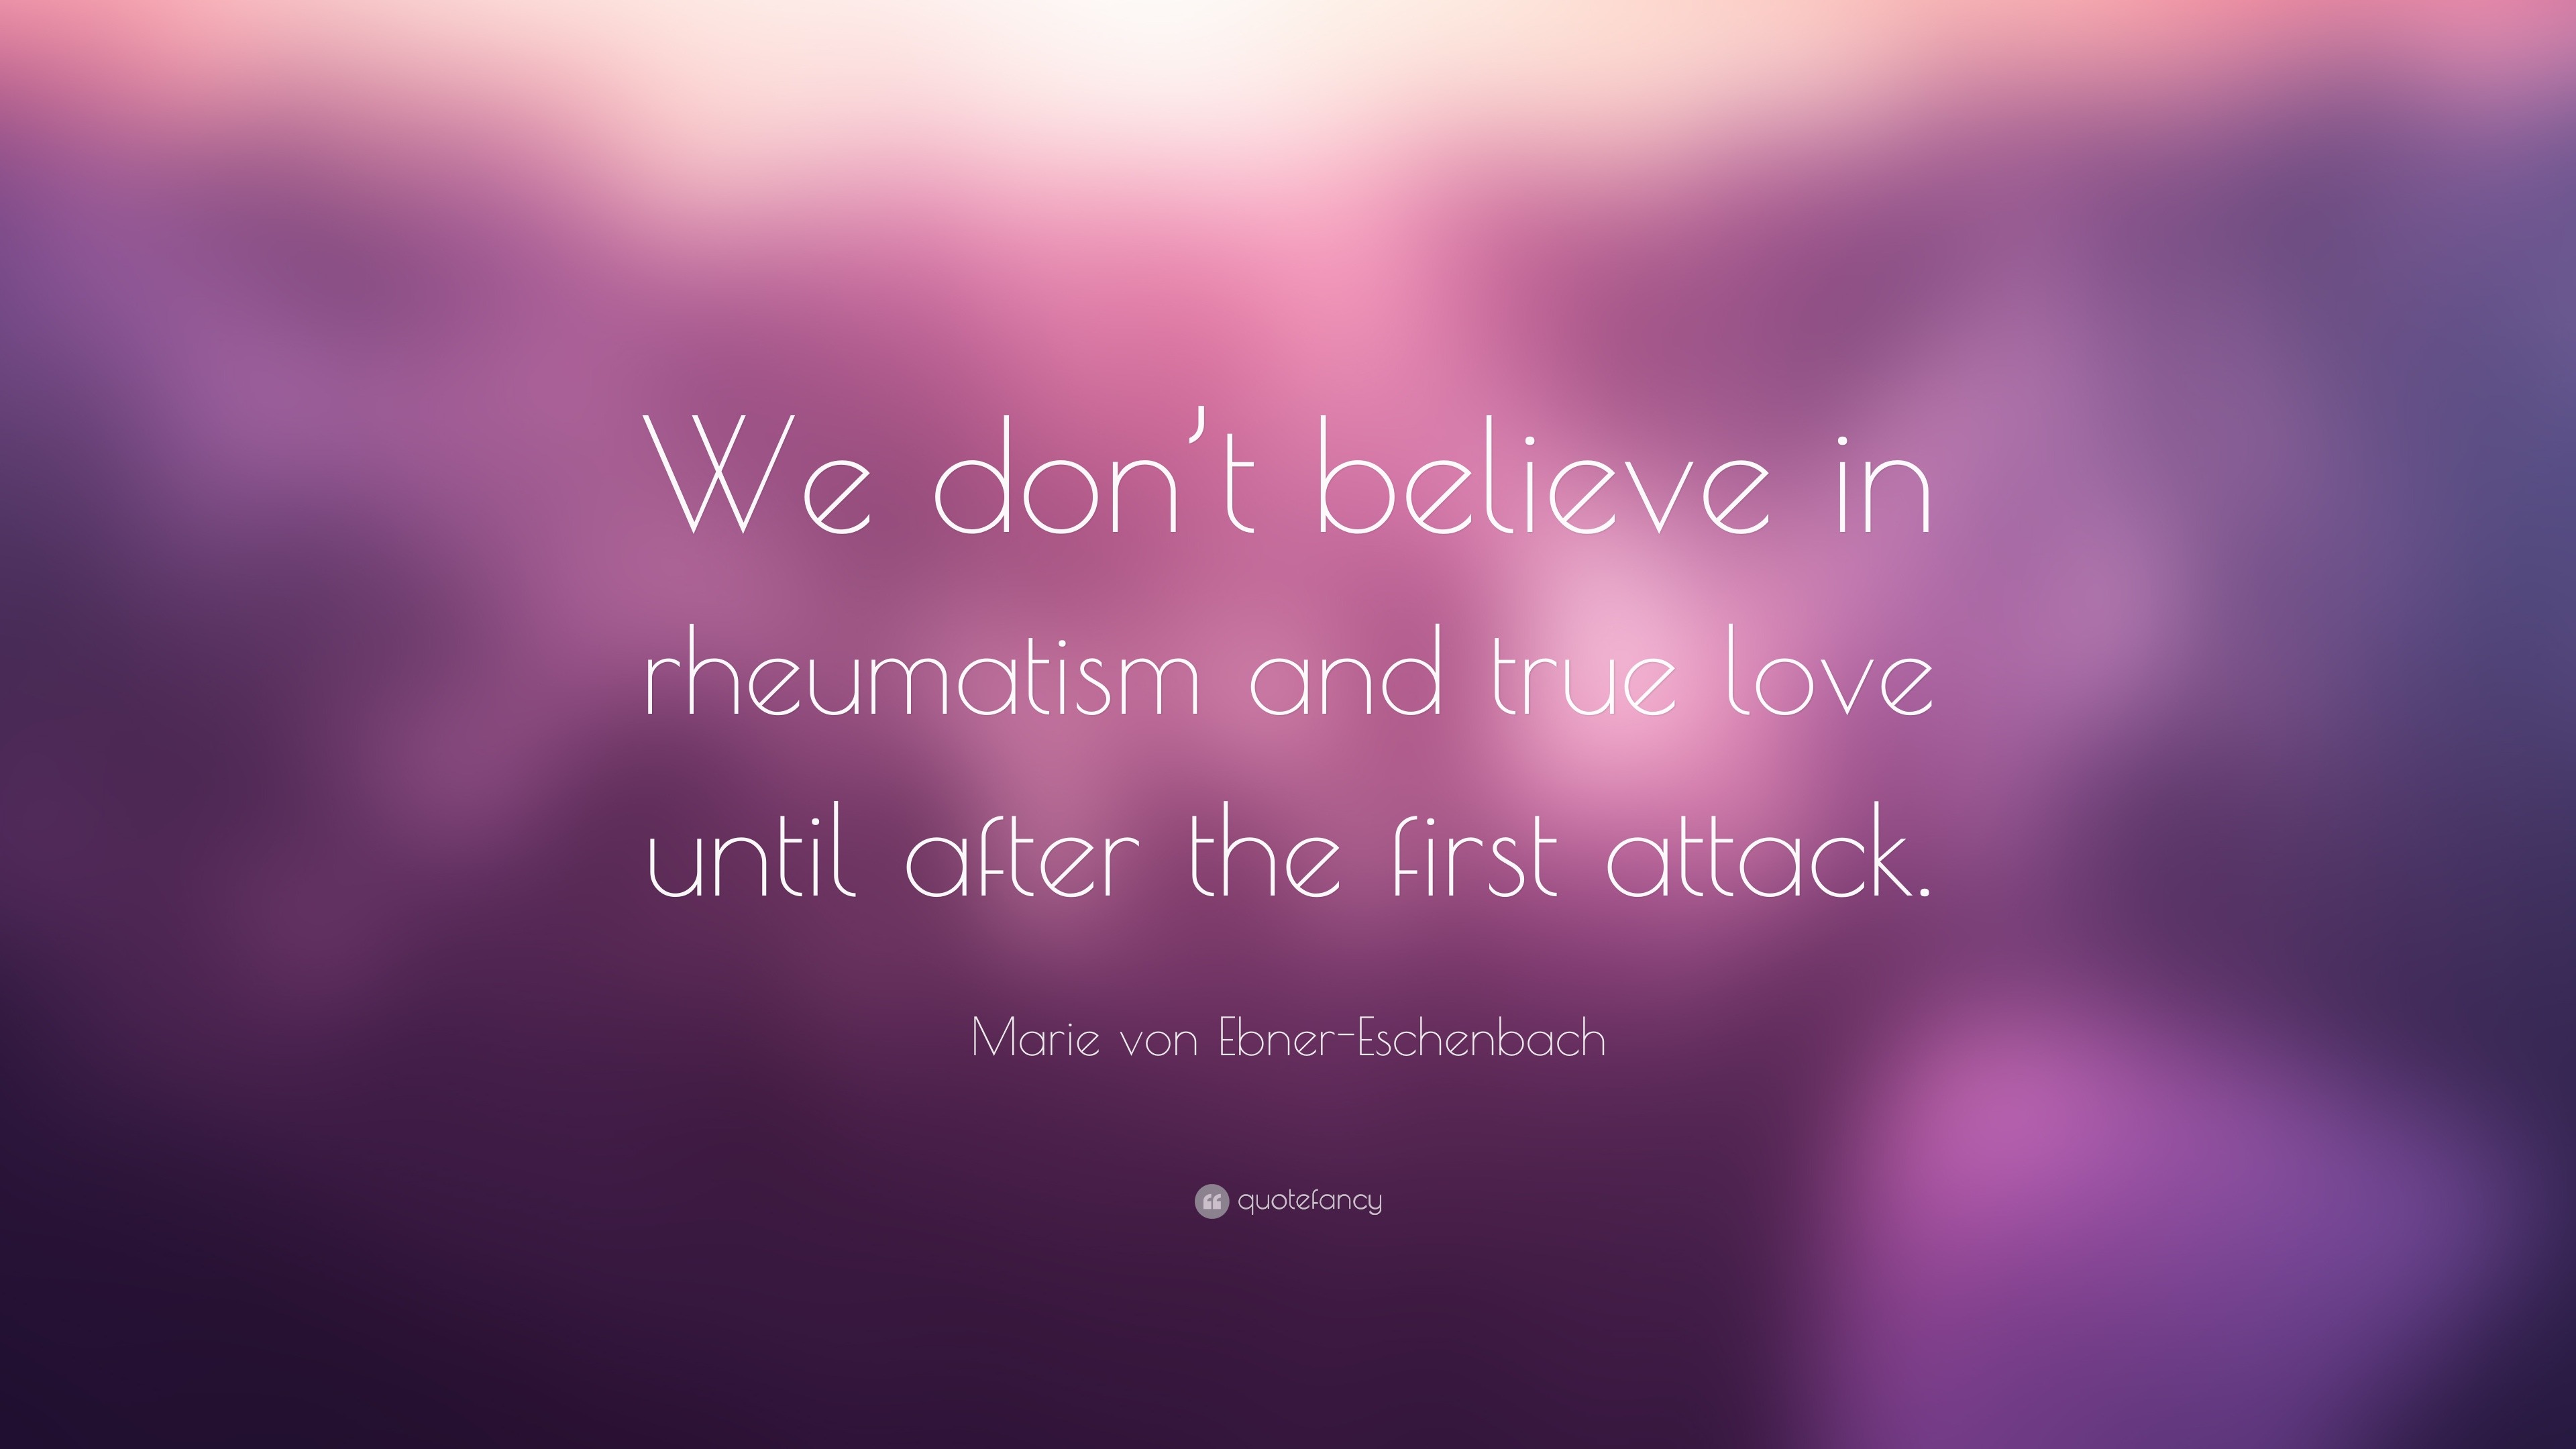 Valentine s Day Quotes “We don t believe in rheumatism and true love until